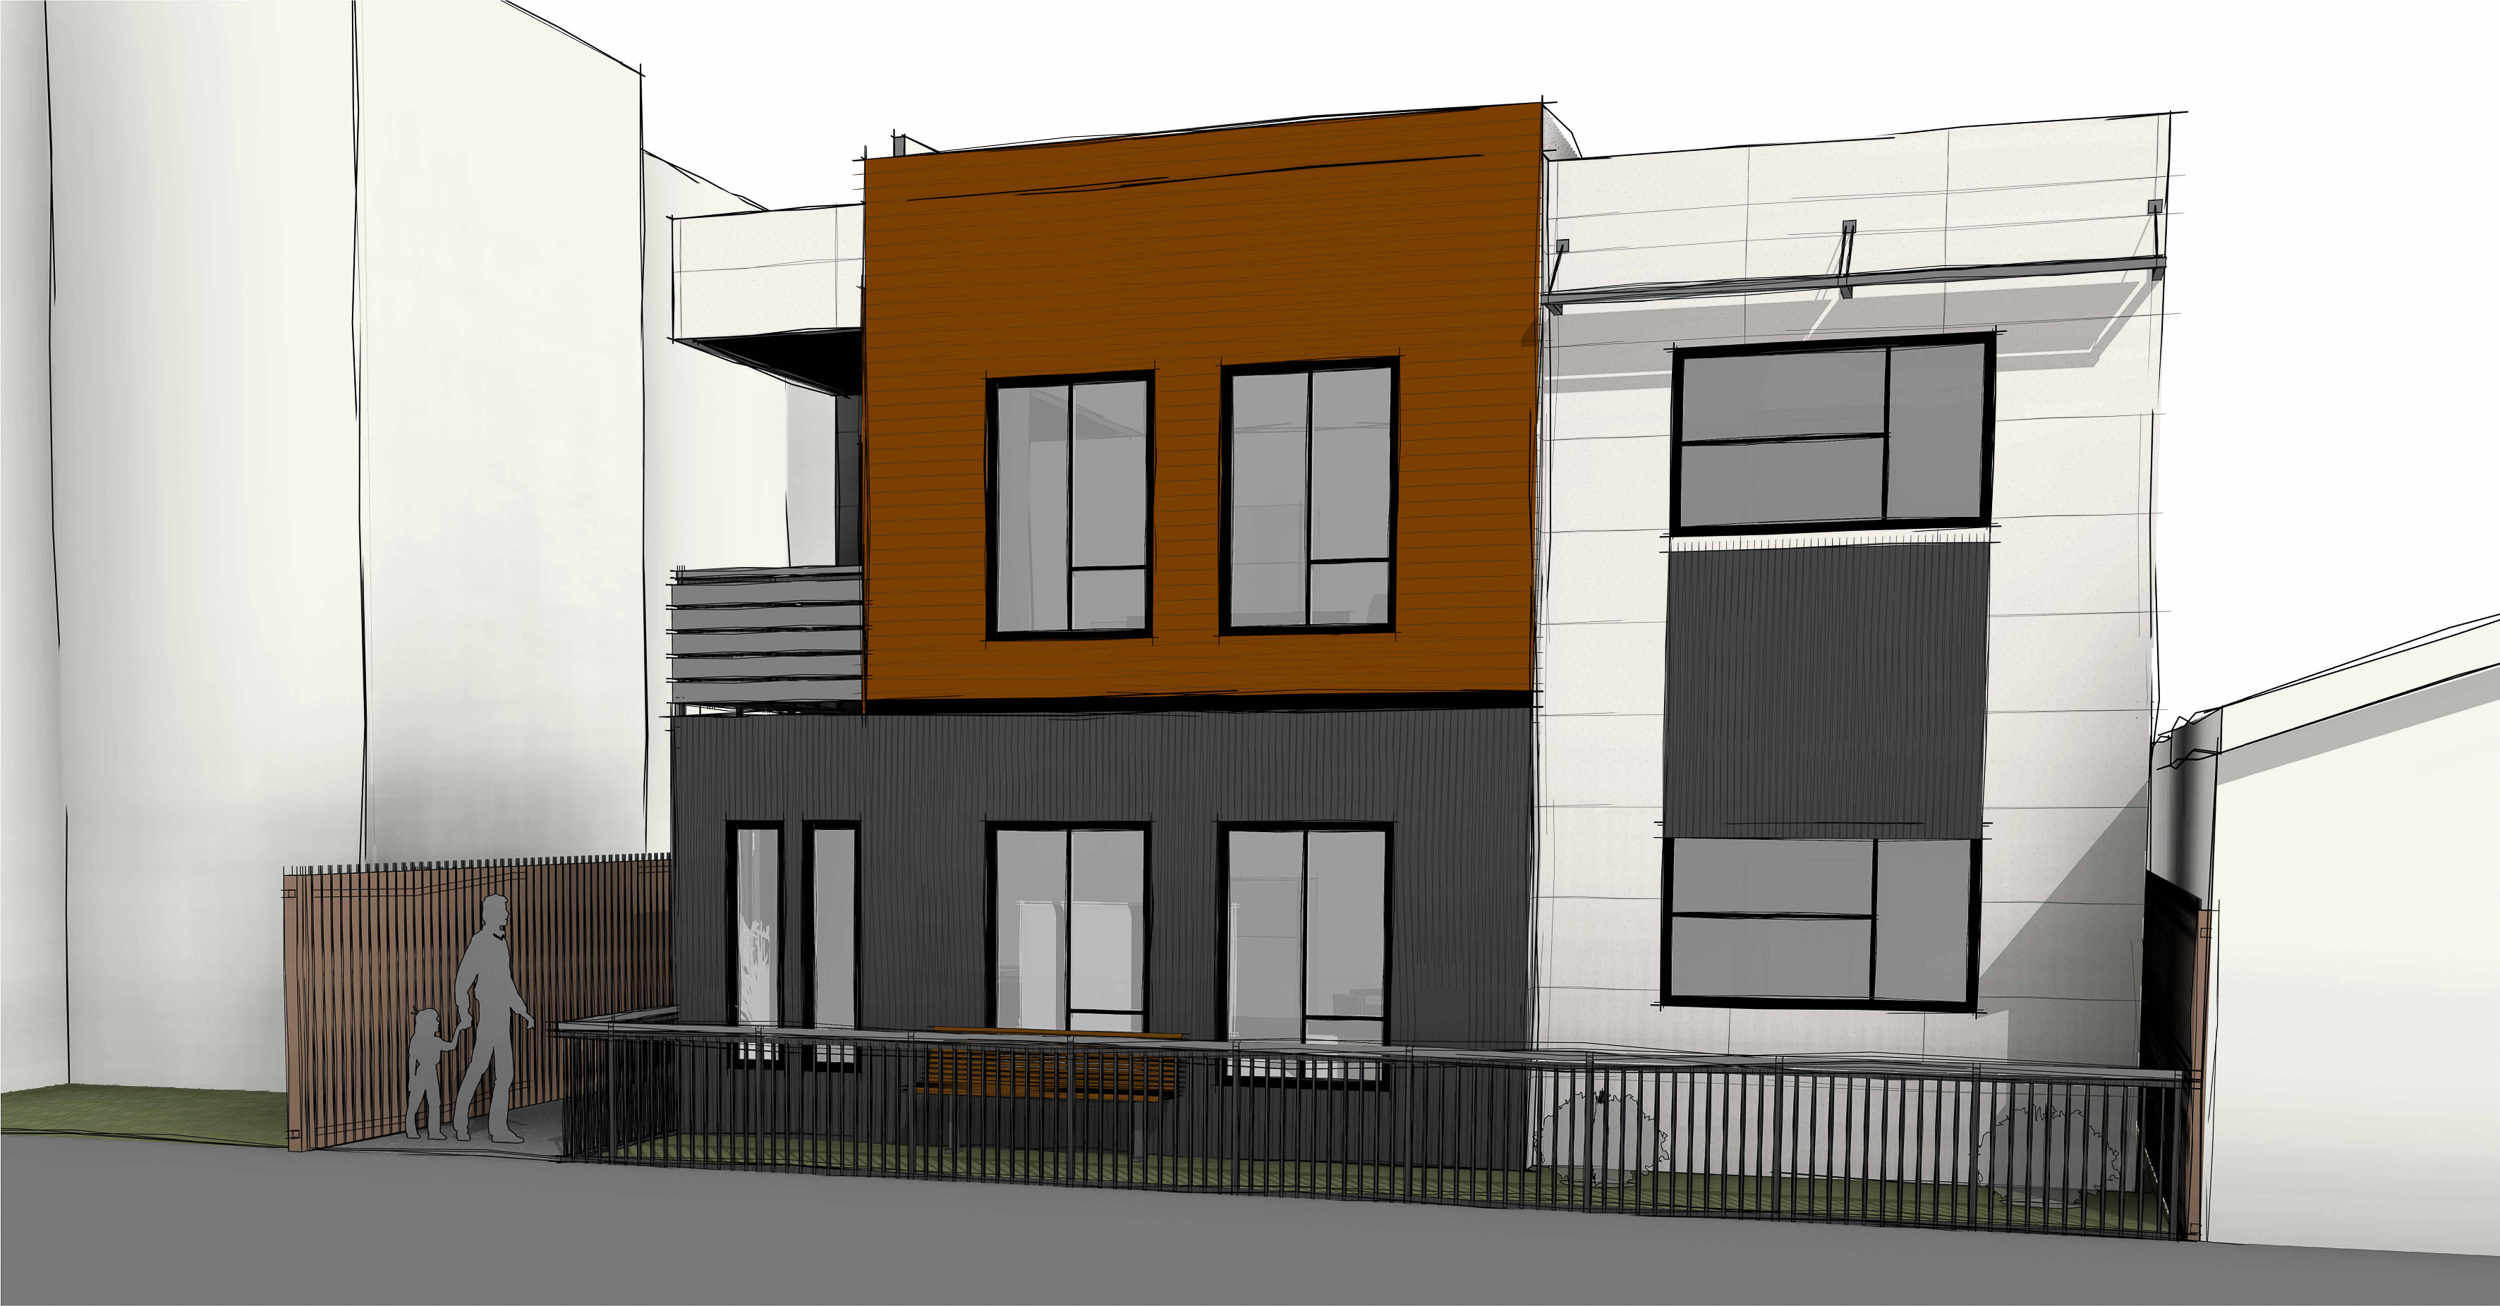 509 T Street duplex facing Solons Avenue, rendering by Greyscale Homes Inc